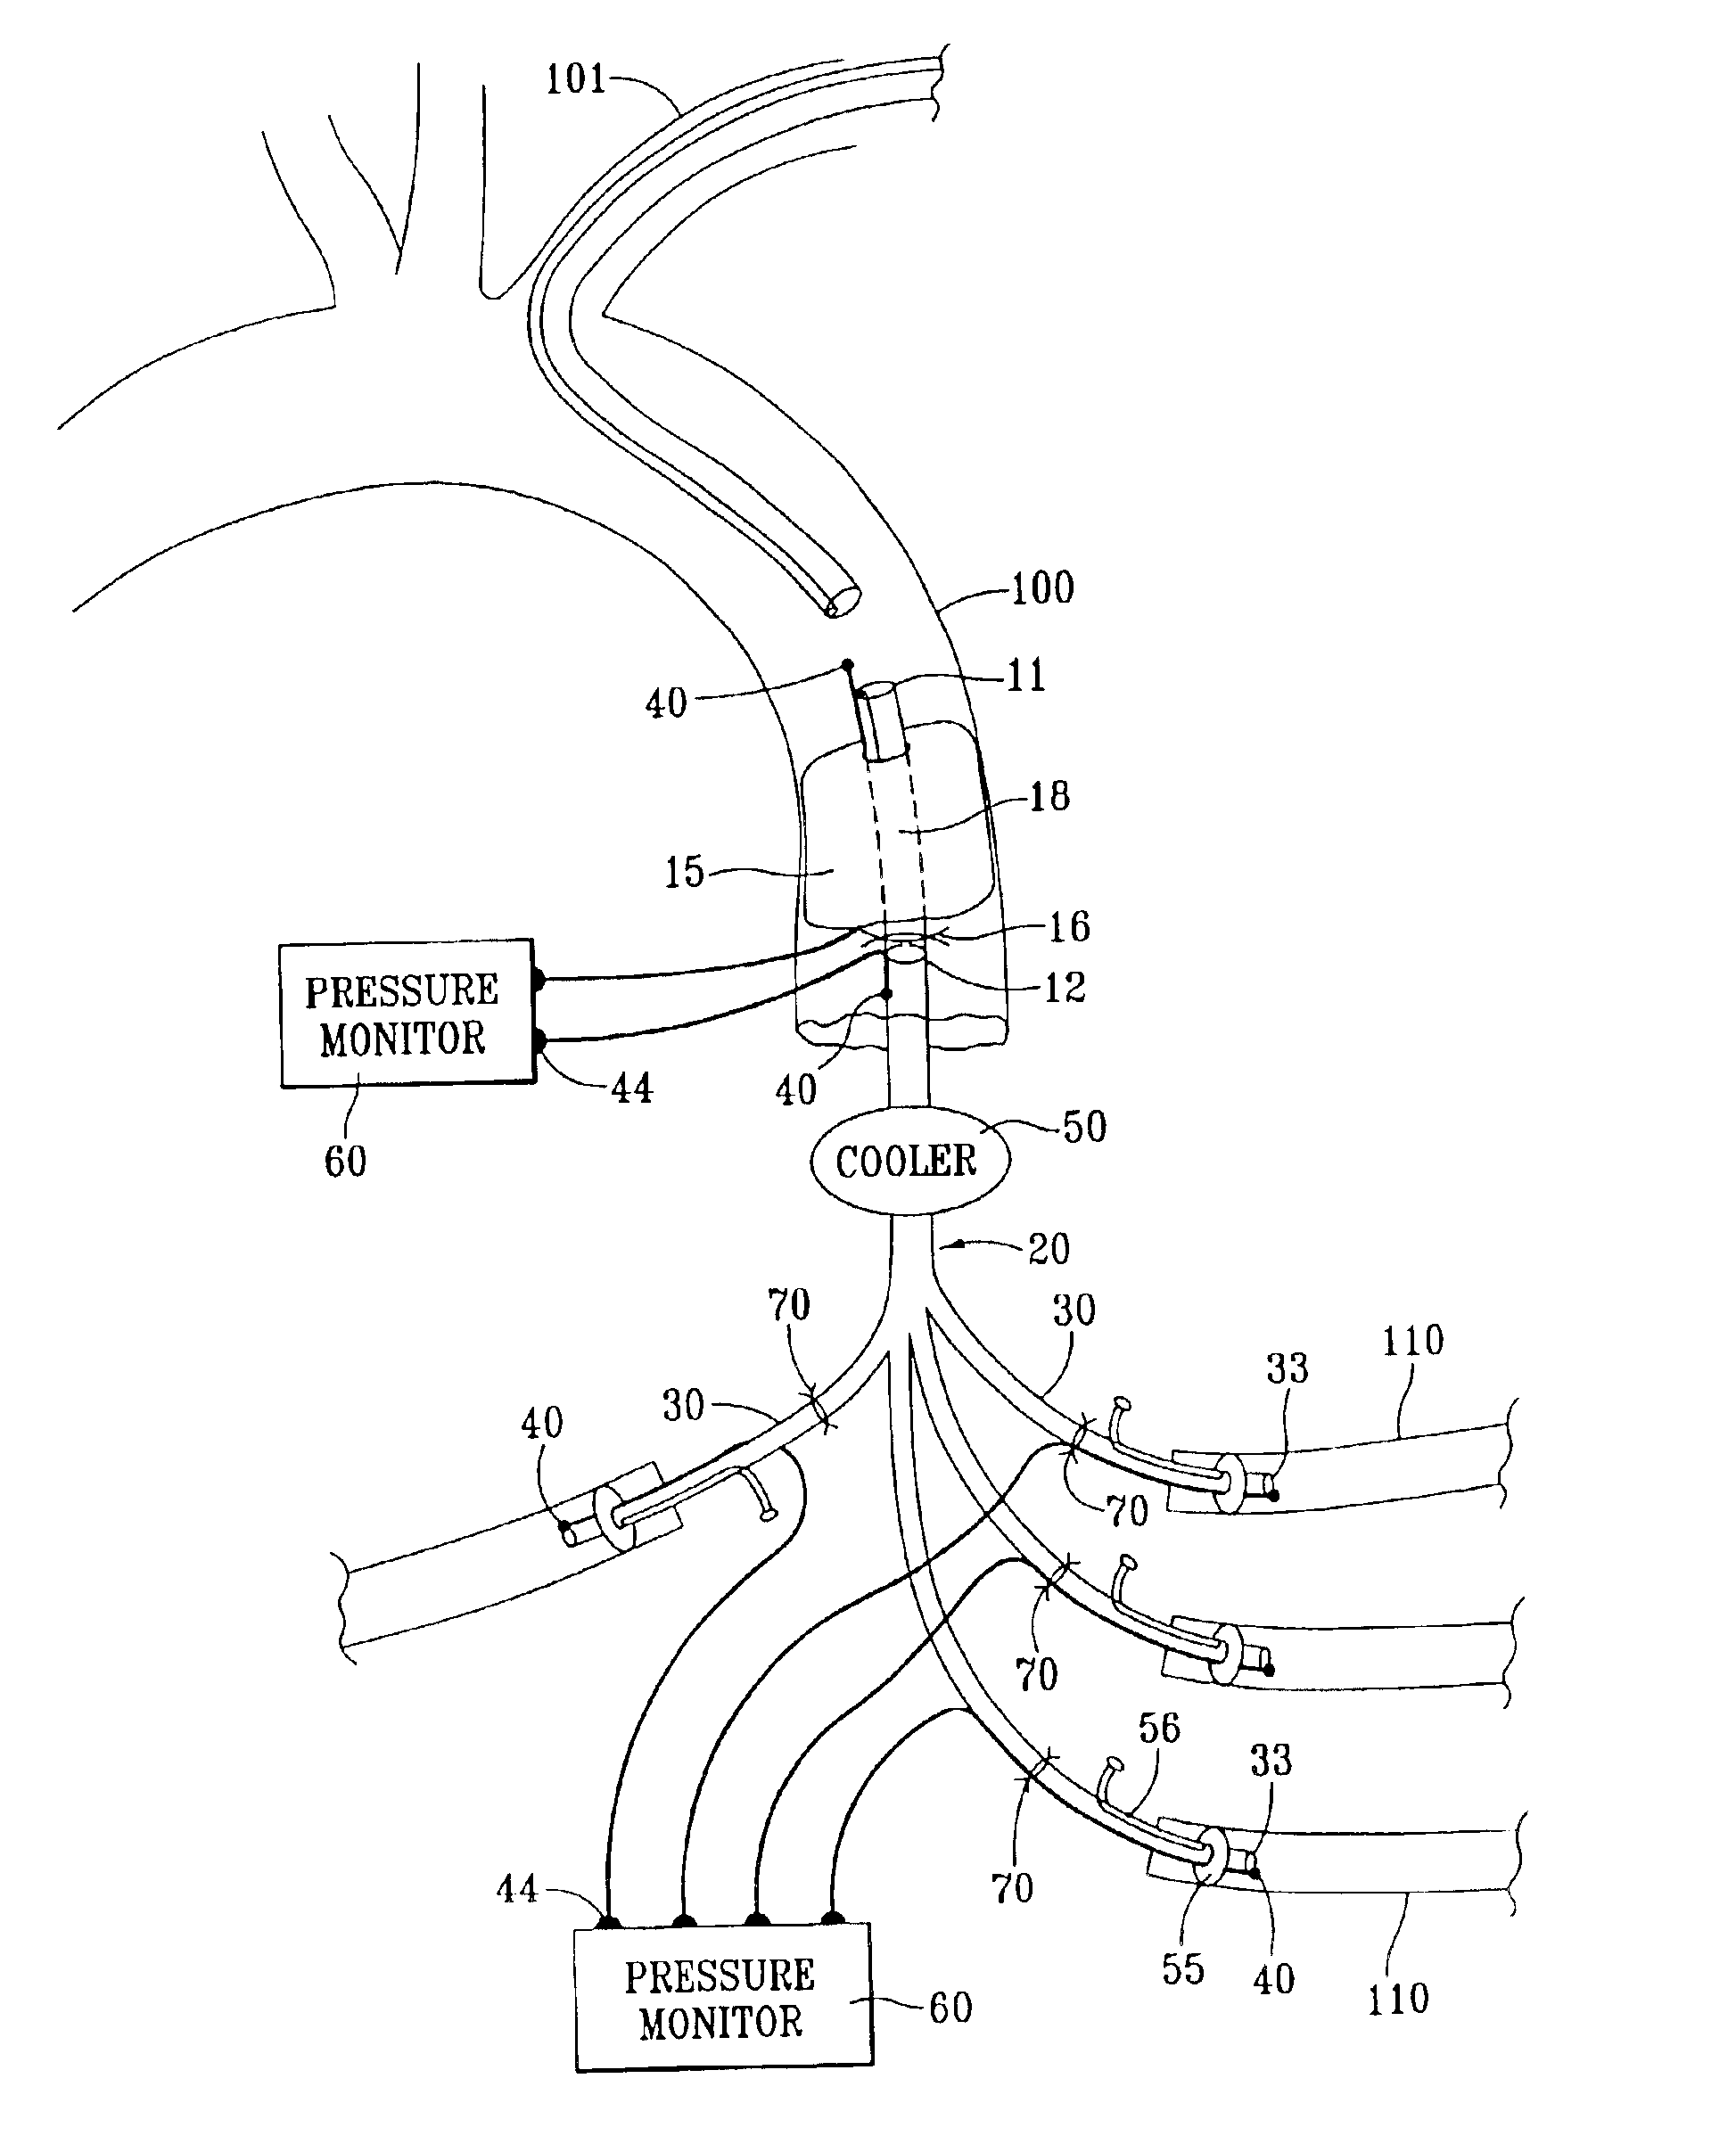 Aortic shunt with spinal perfusion and cooling device